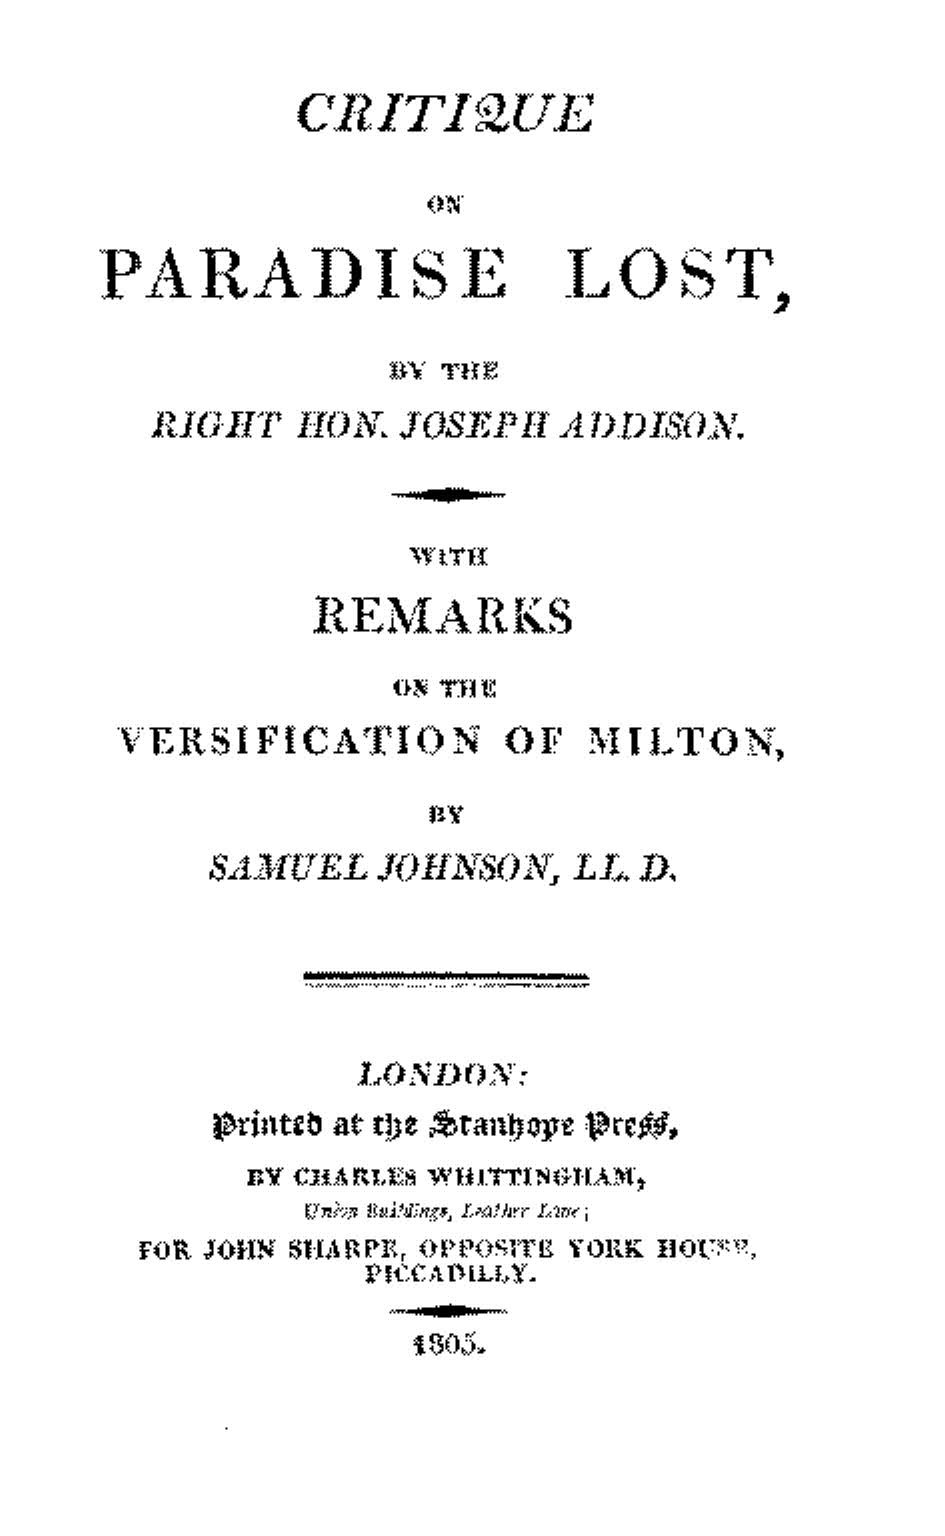 Critique on Paradise Lost: with remarks on the versification of Milton by Samuel Johnson